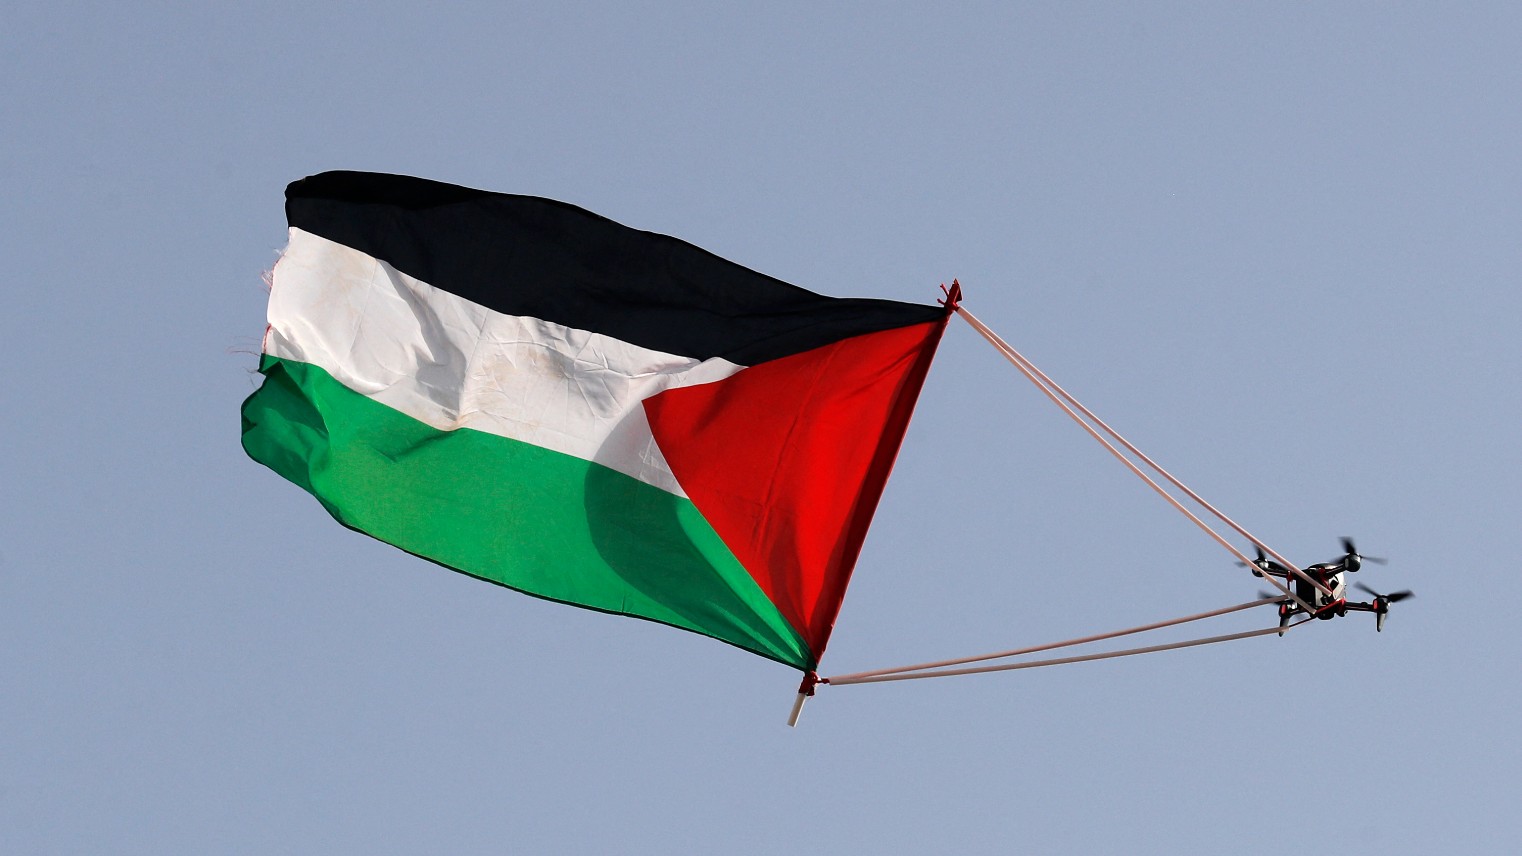 Why is Israel so afraid of the Palestinian flag?